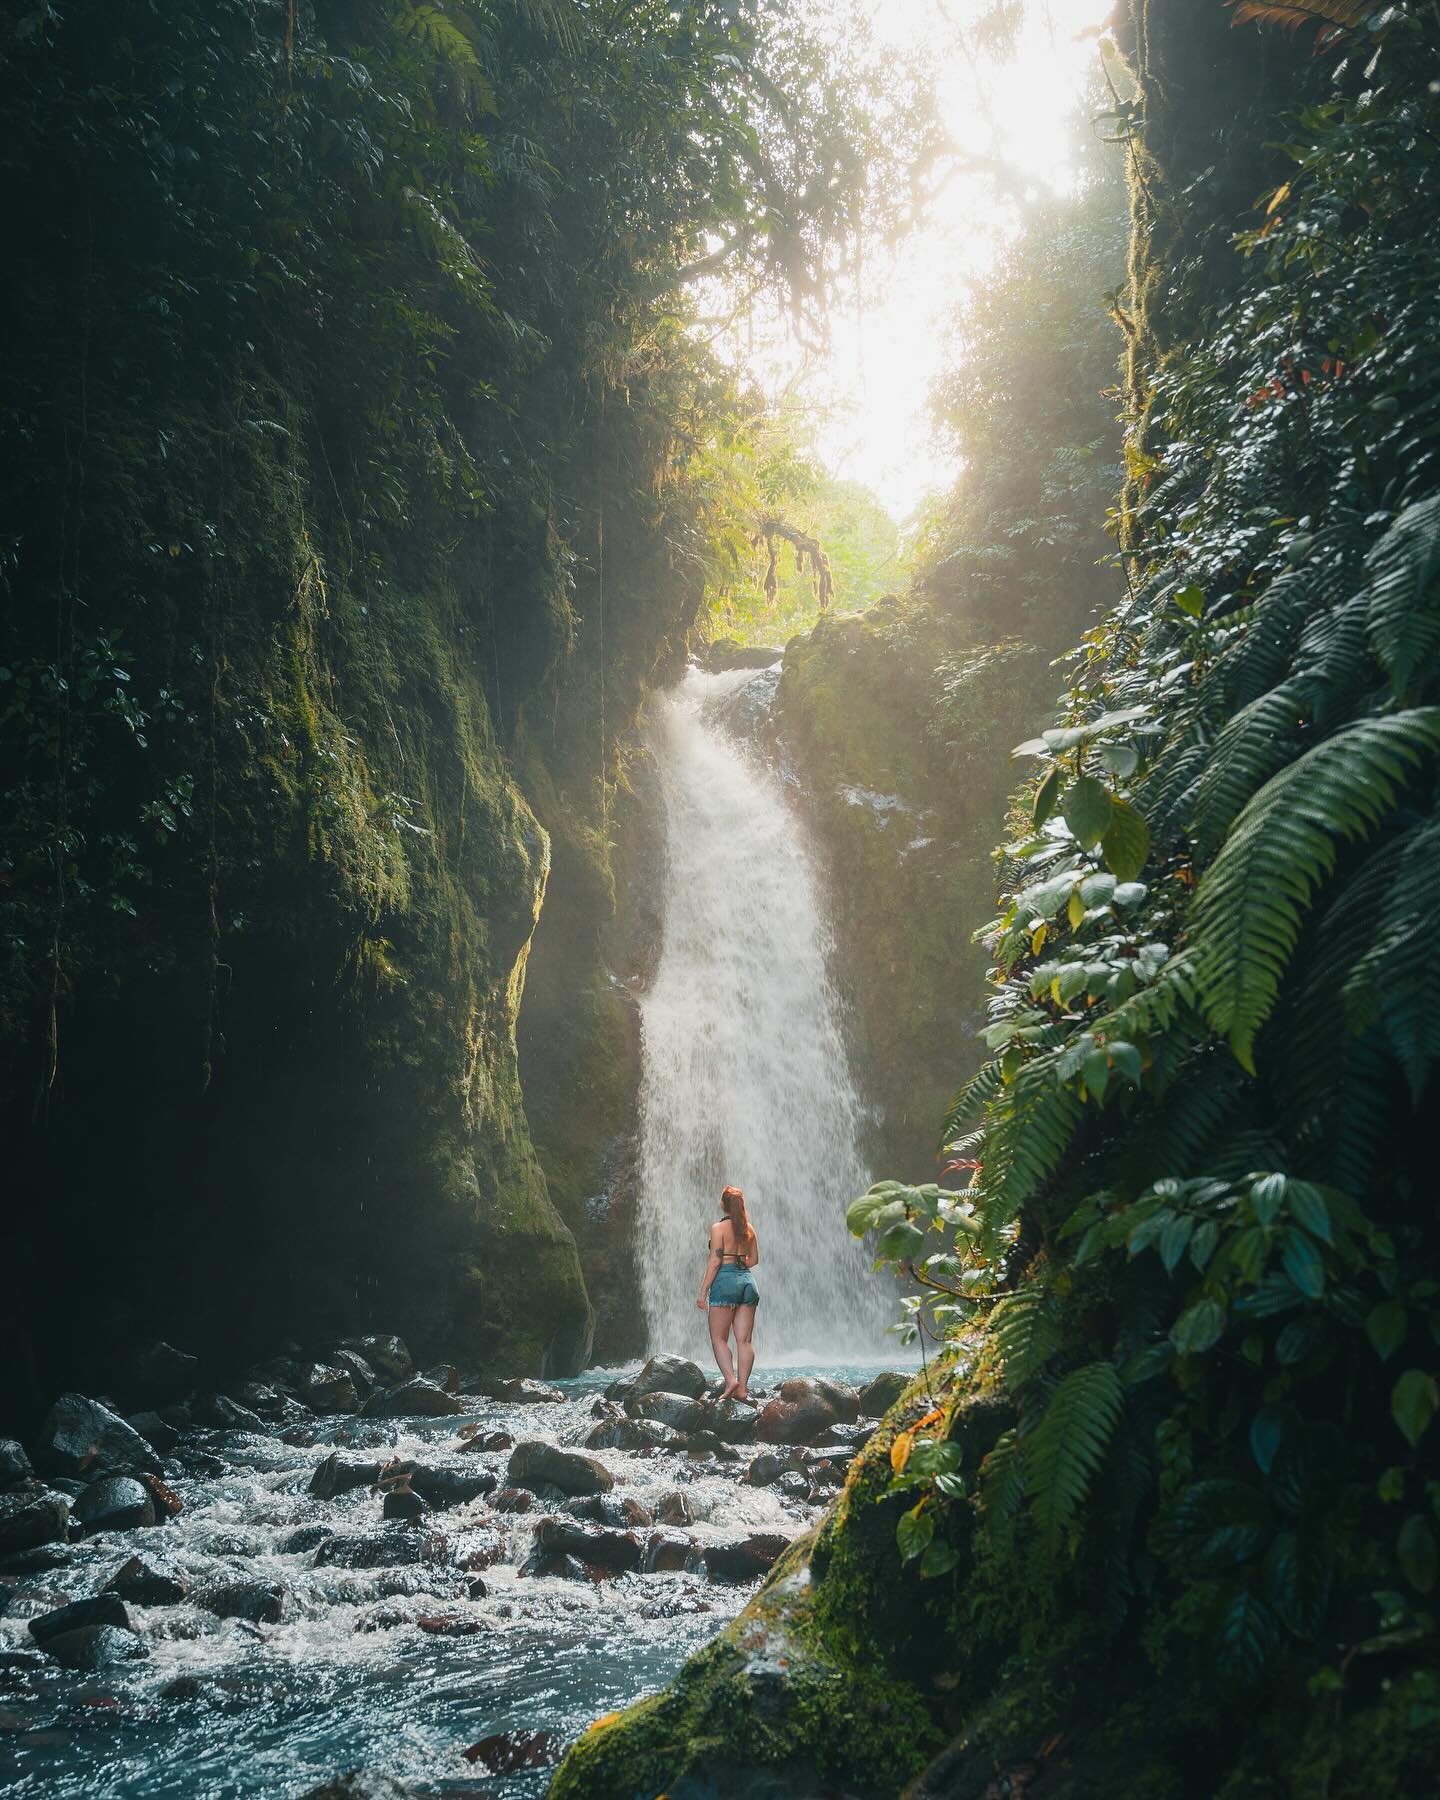 With its endless lush greens, stunning waterfalls, and diverse wildlife, Costa Rica will captivate you in a way you&rsquo;ve never experienced 🌿💦🐒

Is anyone traveling to Costa Rica this year ?! 
.
.
.
.
.
#costarica #explorecostarica #puravida #h